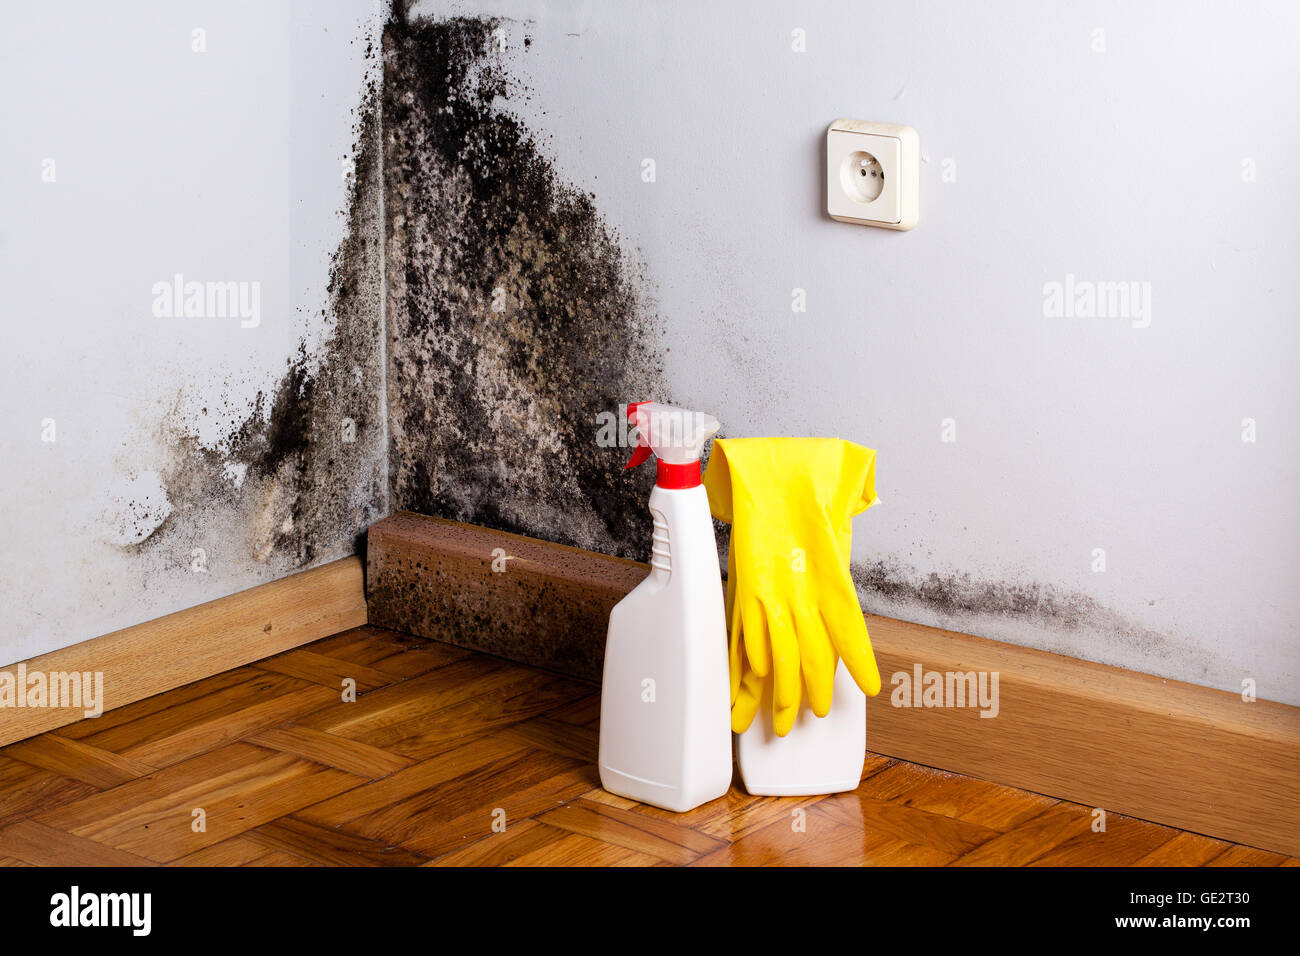 Black mold in the corner of room wall. Preparation for mold removal. Stock Photo